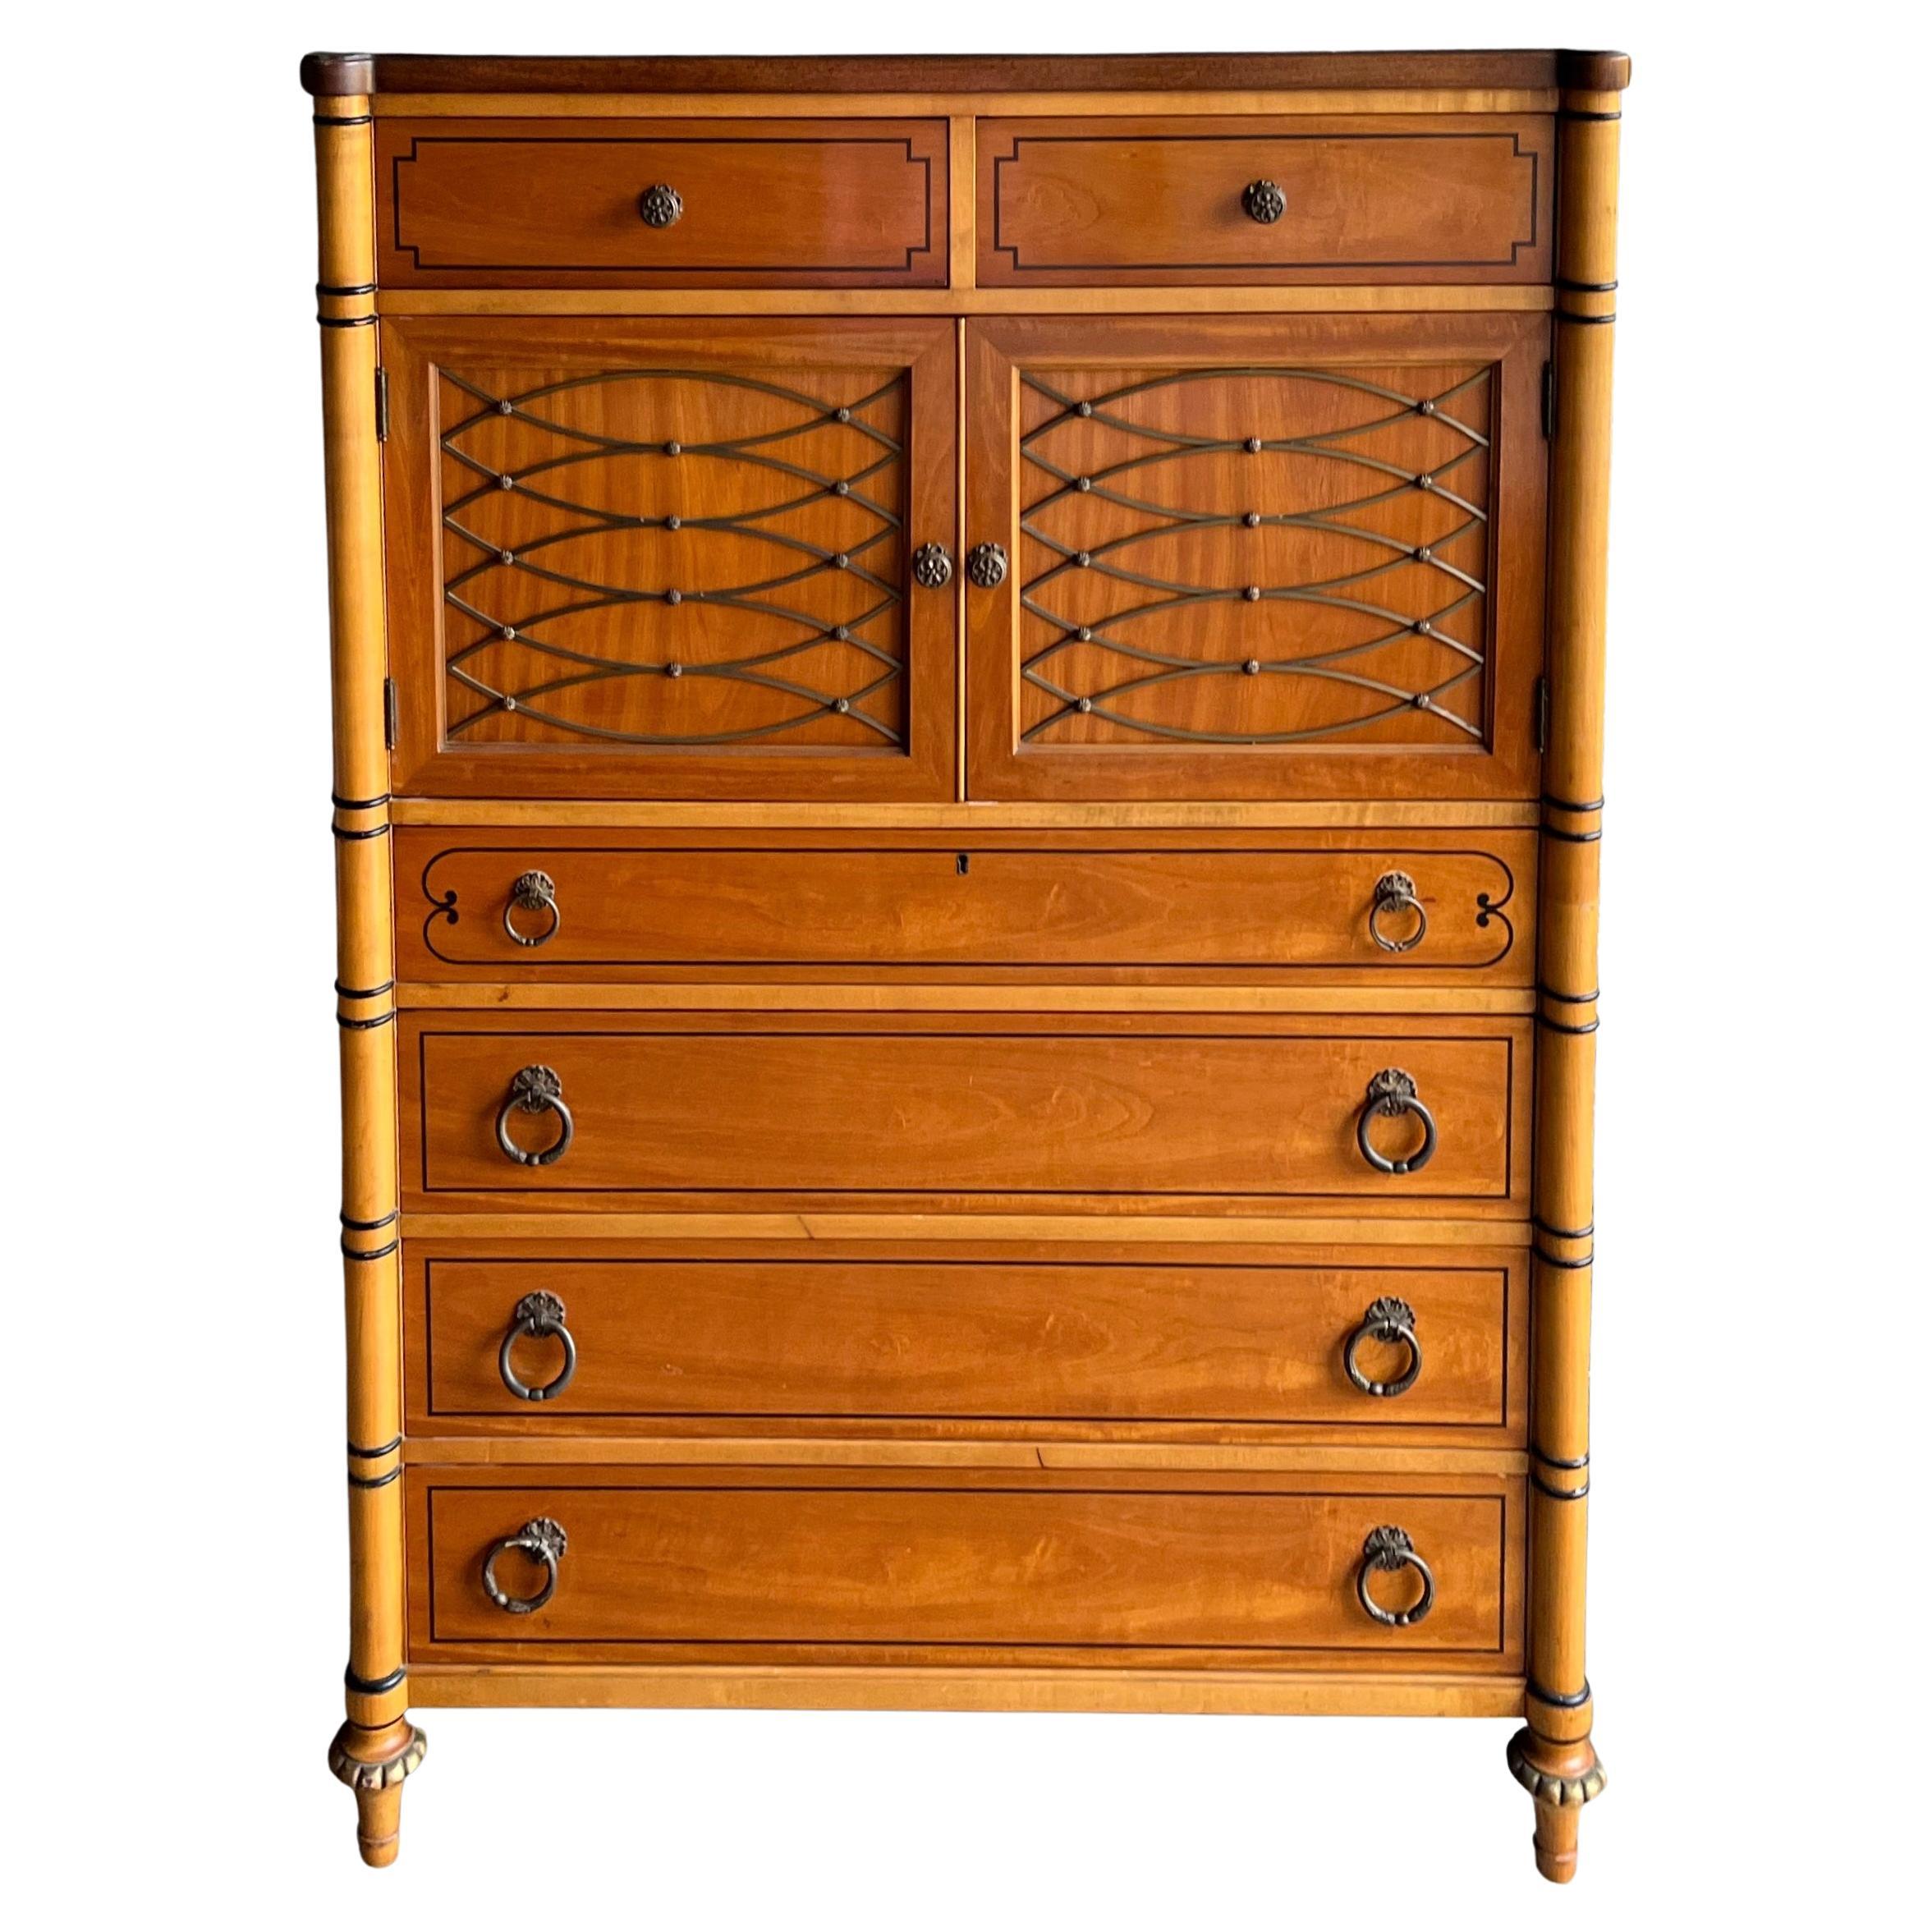 1940s French Regency Style Faux Bamboo Inspired Tall Maple Chest of Drawers